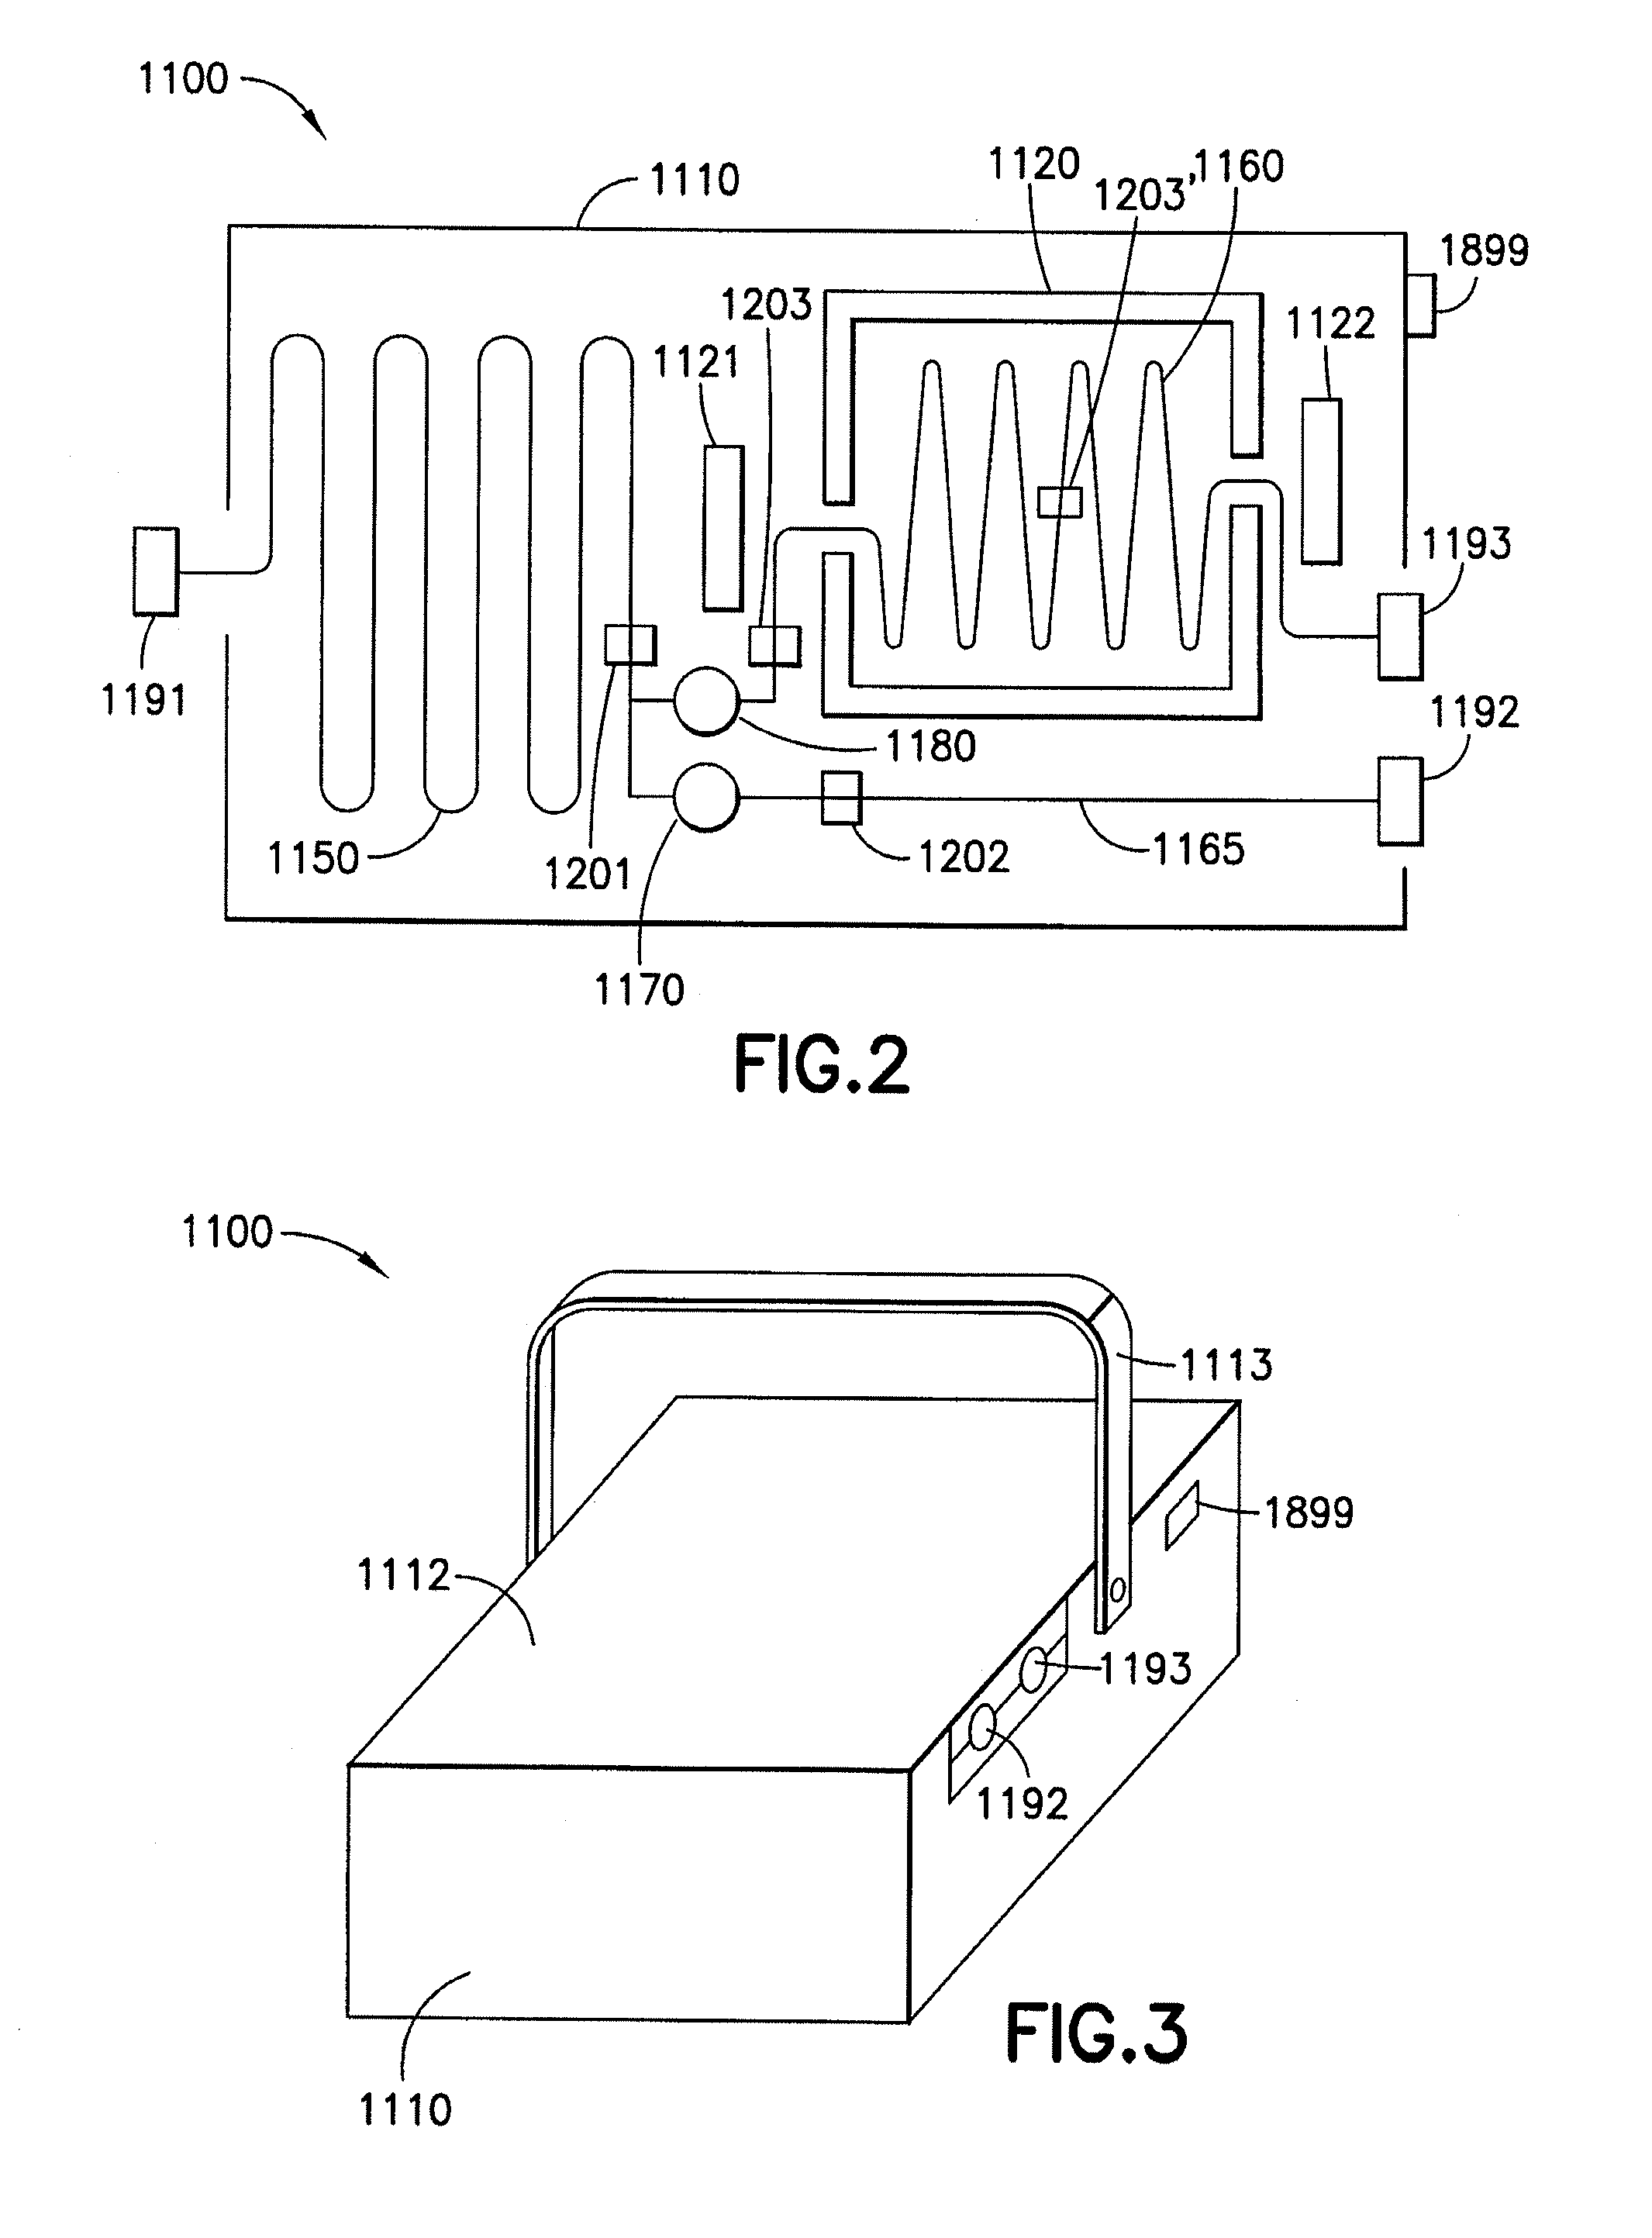 Device and Method for Determining Activity of Radiopharmaceutical Material